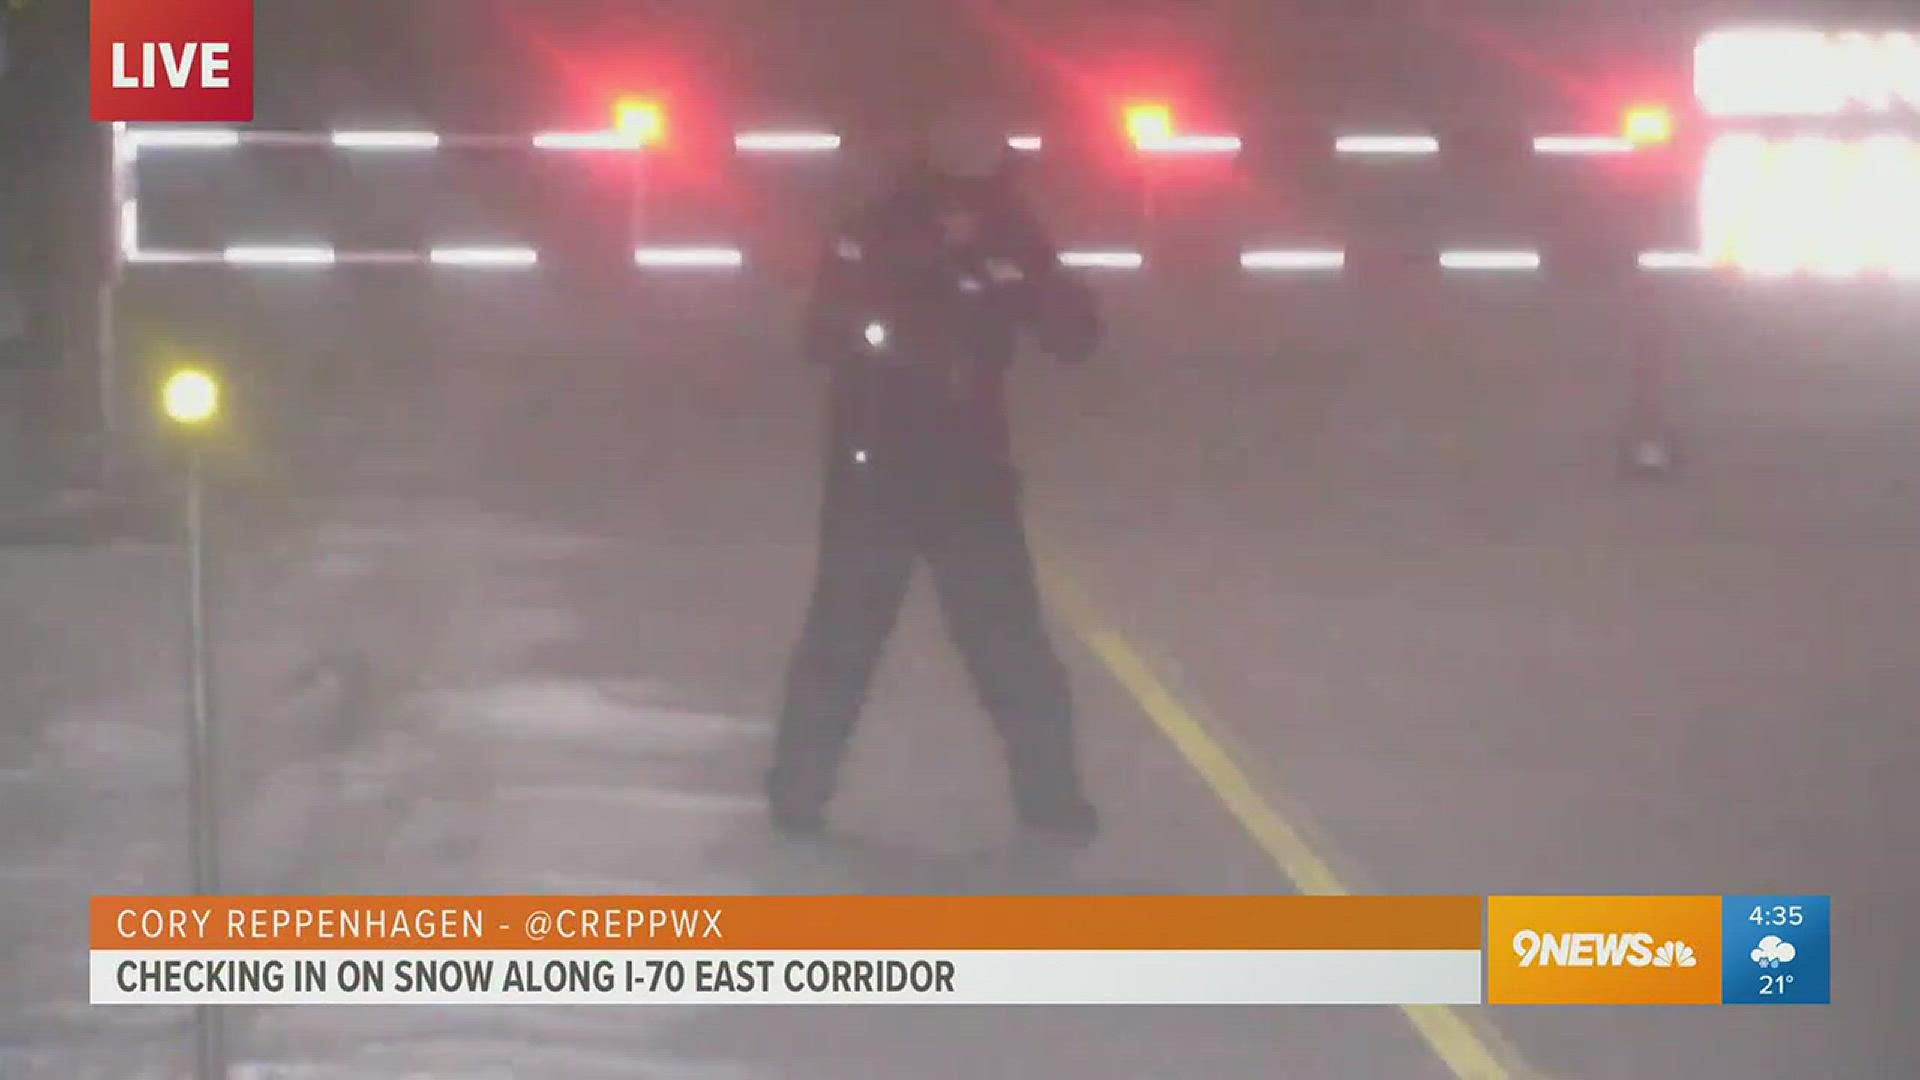 9news meteorologist Cory Reppenhagen reports live along I-70 east and almost gets blown away by the strong storms.